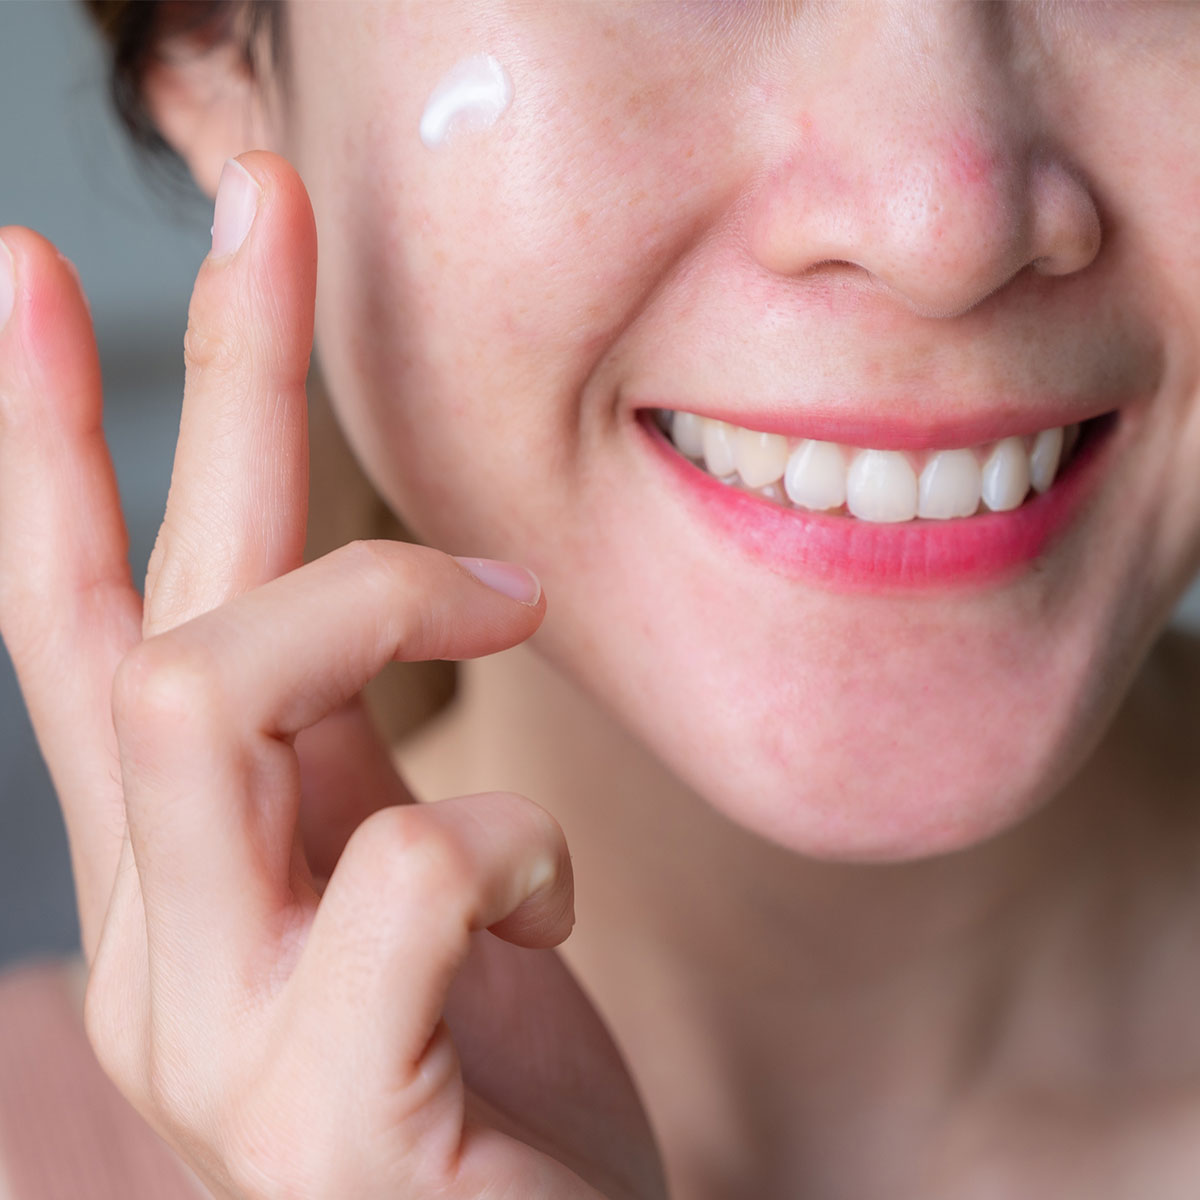 The One Moisturizer Ingredient You Need To Avoid To Prevent Premature Wrinkling